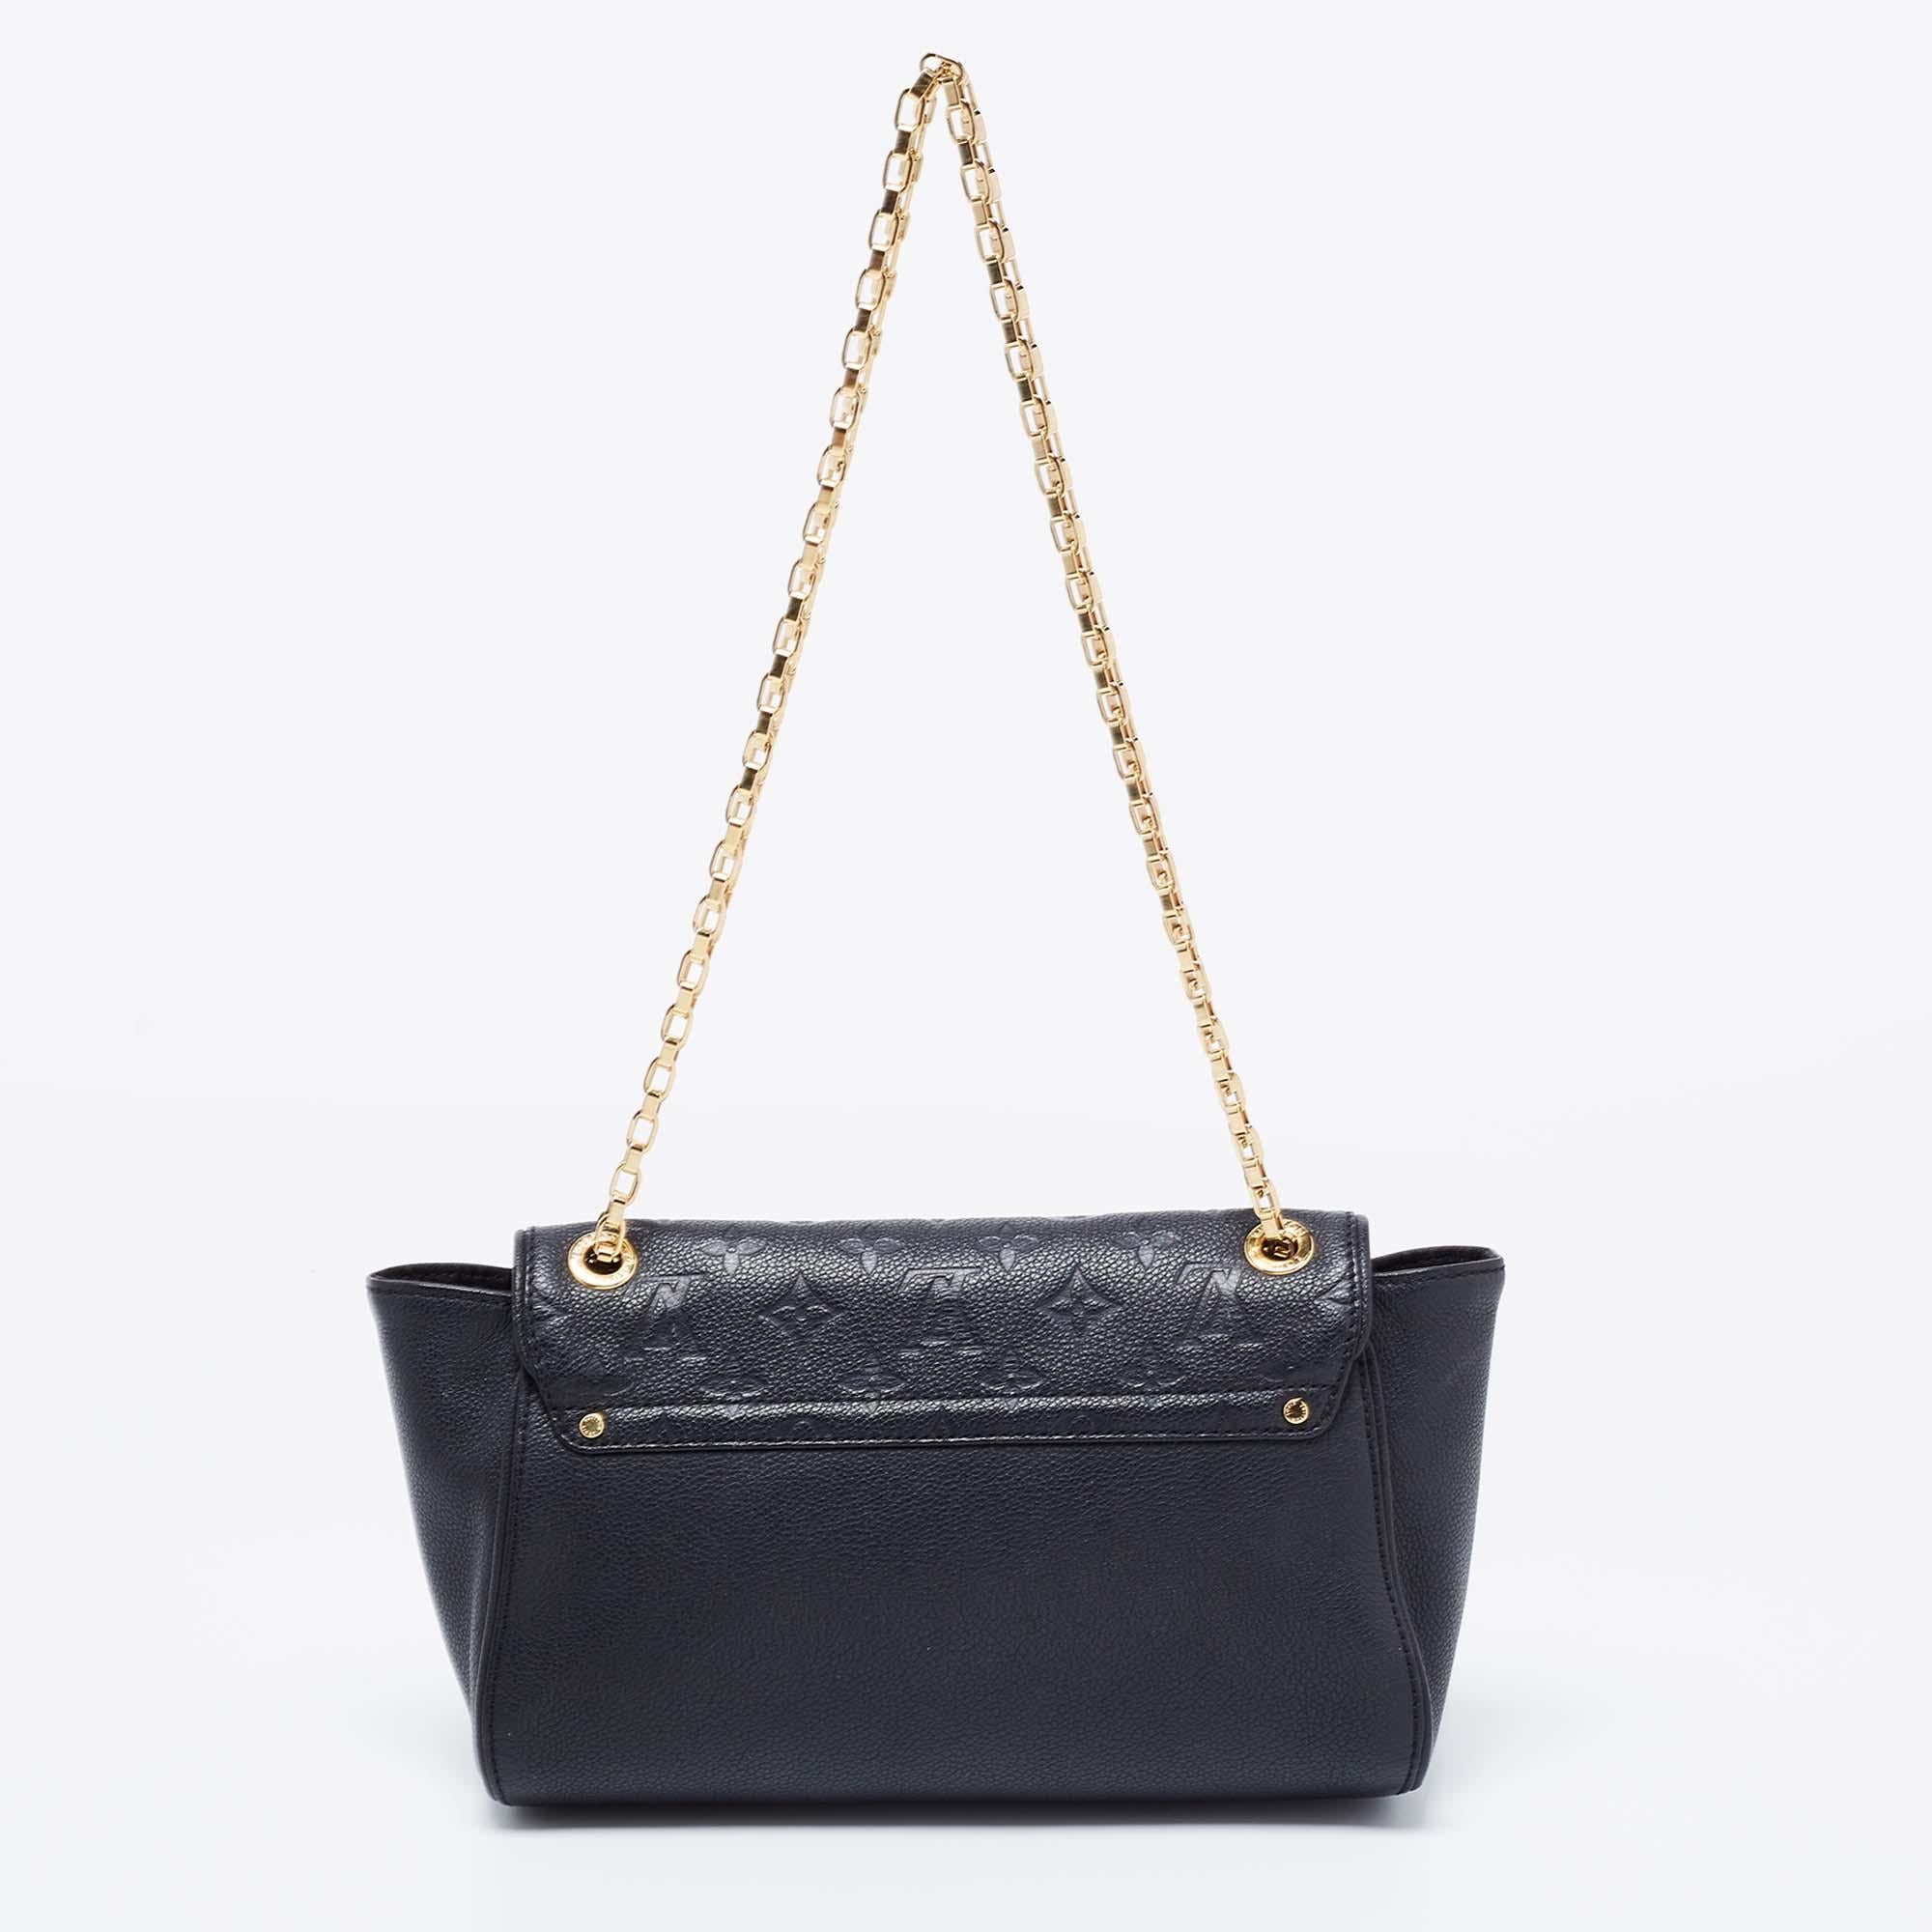 A perfect bag to instantly get recognized is this St Germain bag from Louis Vuitton. Crafted in black leather, the flap of this pretty bag is embossed with the LV Monogram and fitted with a gold-tone S-lock closure. The Alcantara-lined interior is